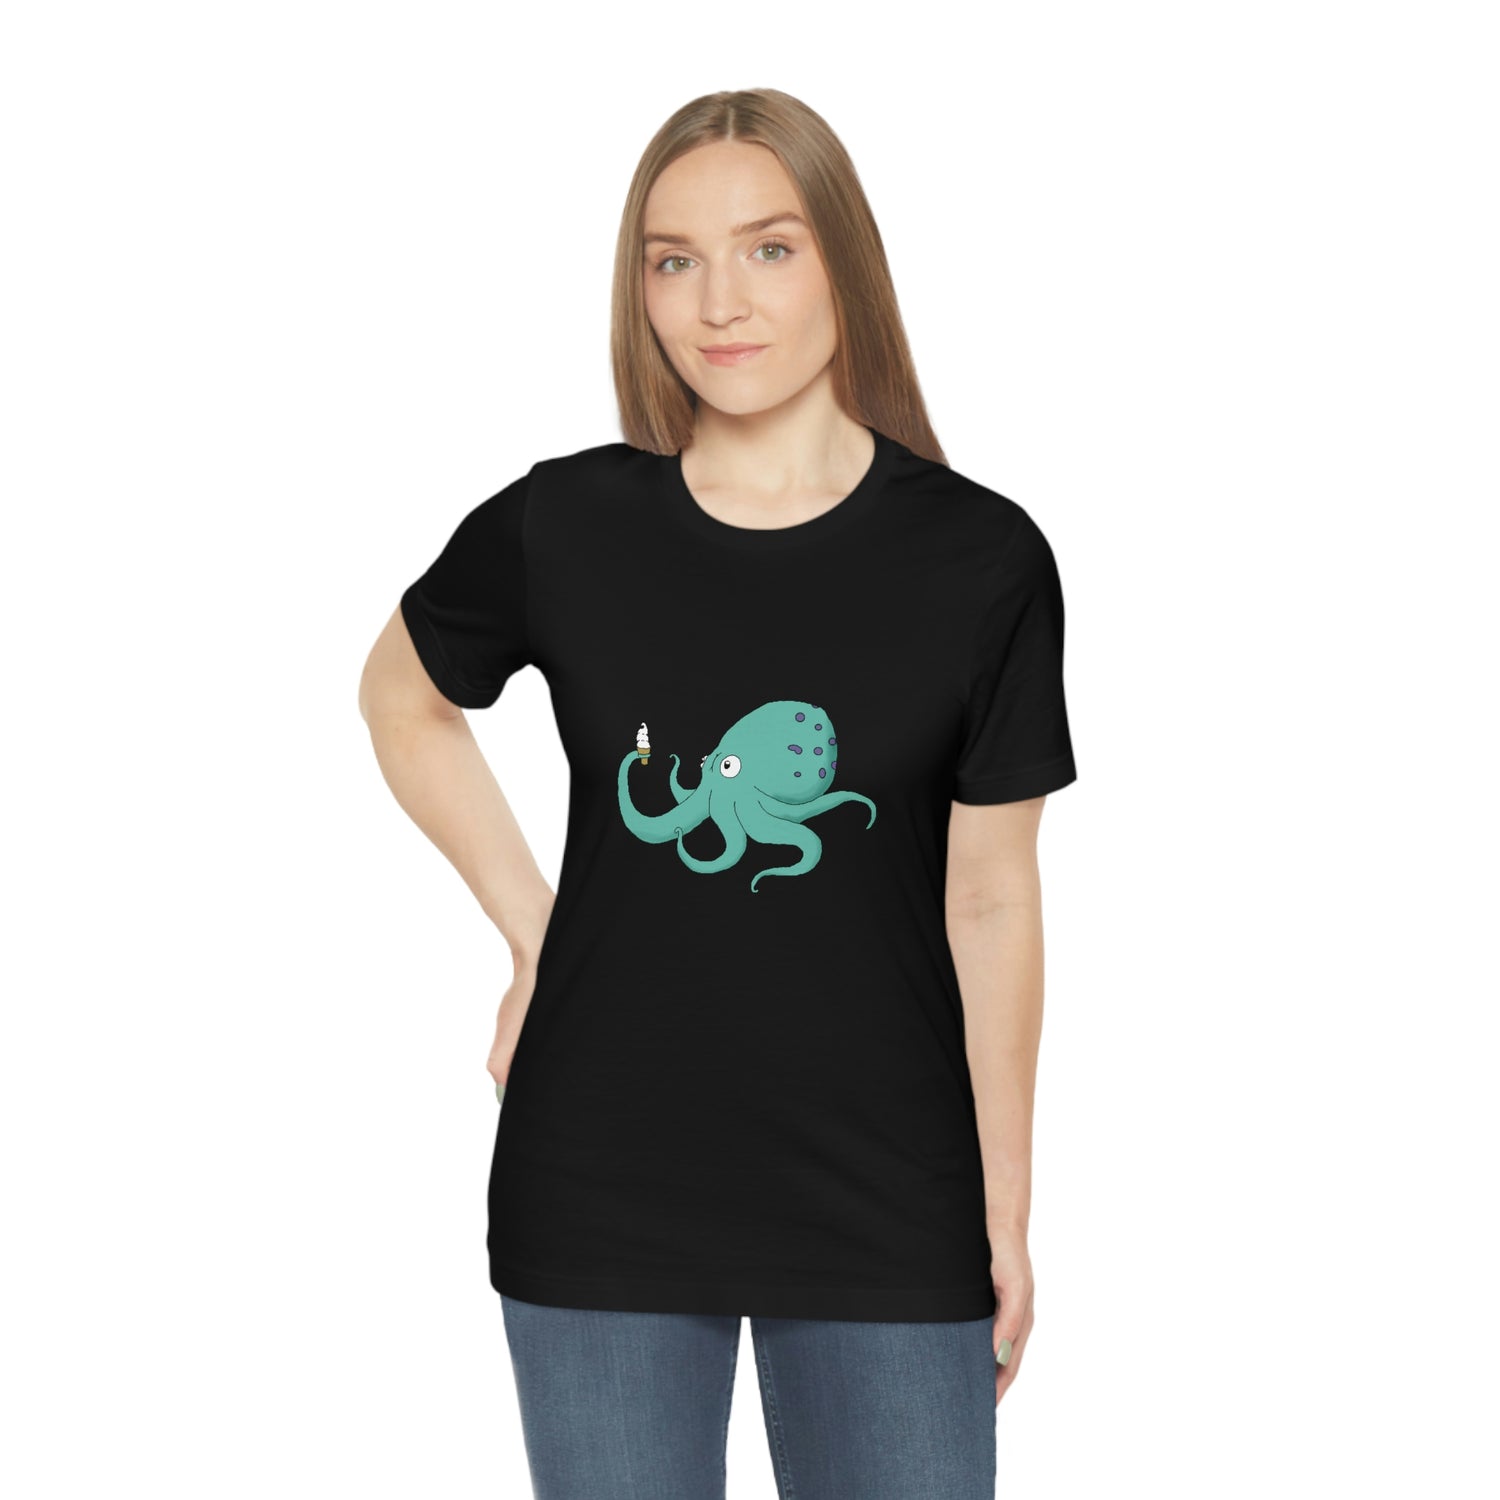 Curious Octopus Cartoon Unisex Tshirt Lord and Lady Towers